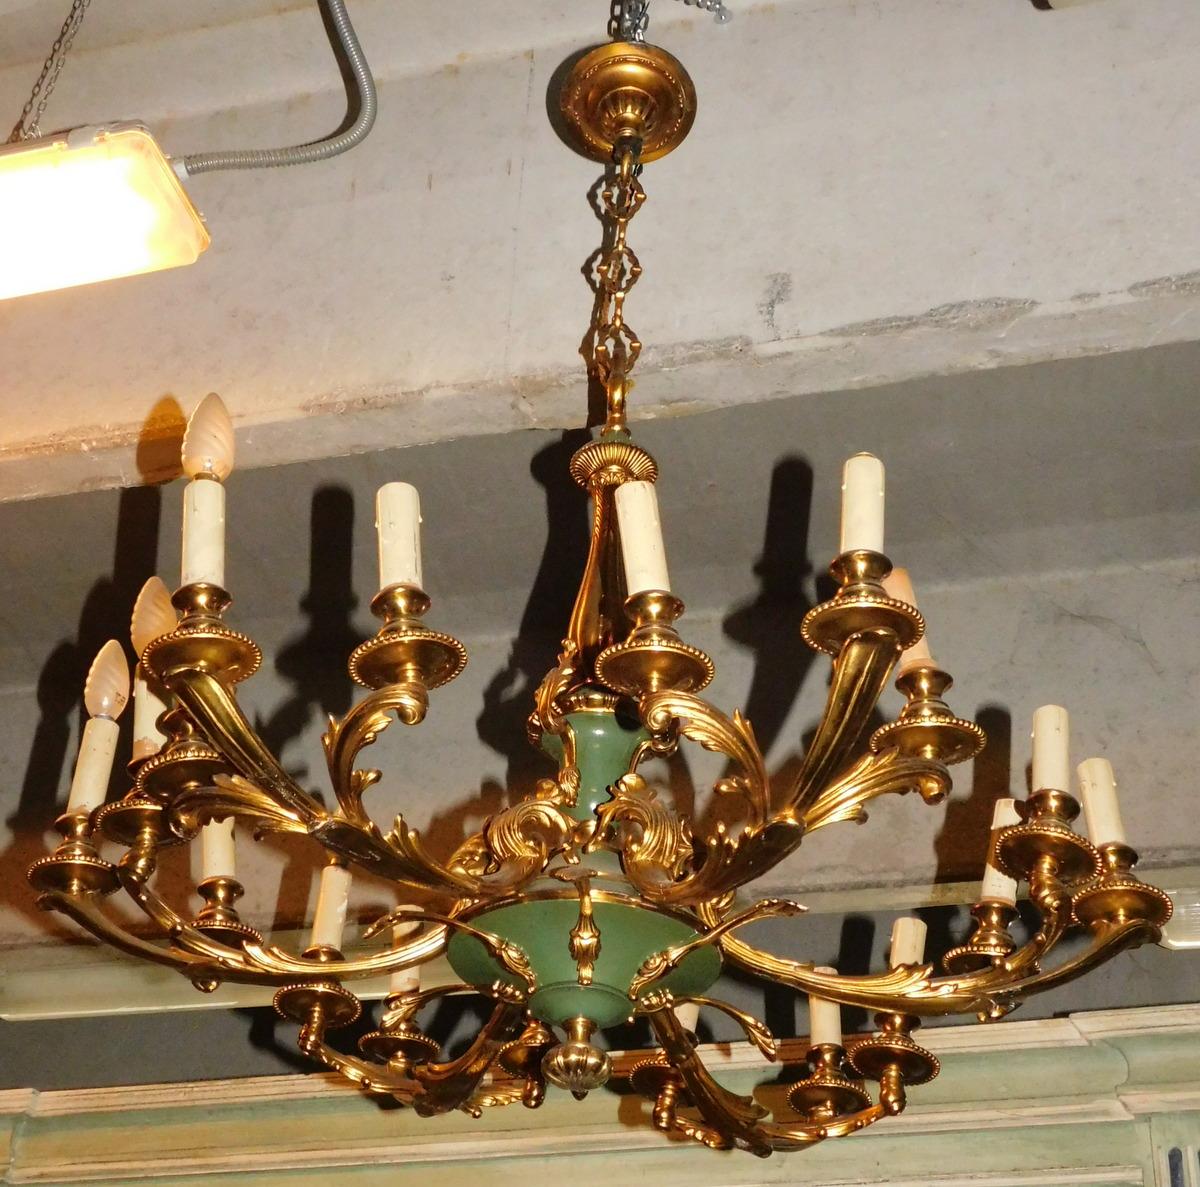 Ceiling Chandelier Lamp, 18 Lights, Gilded Brass, Italian Liberty '900 For Sale 5